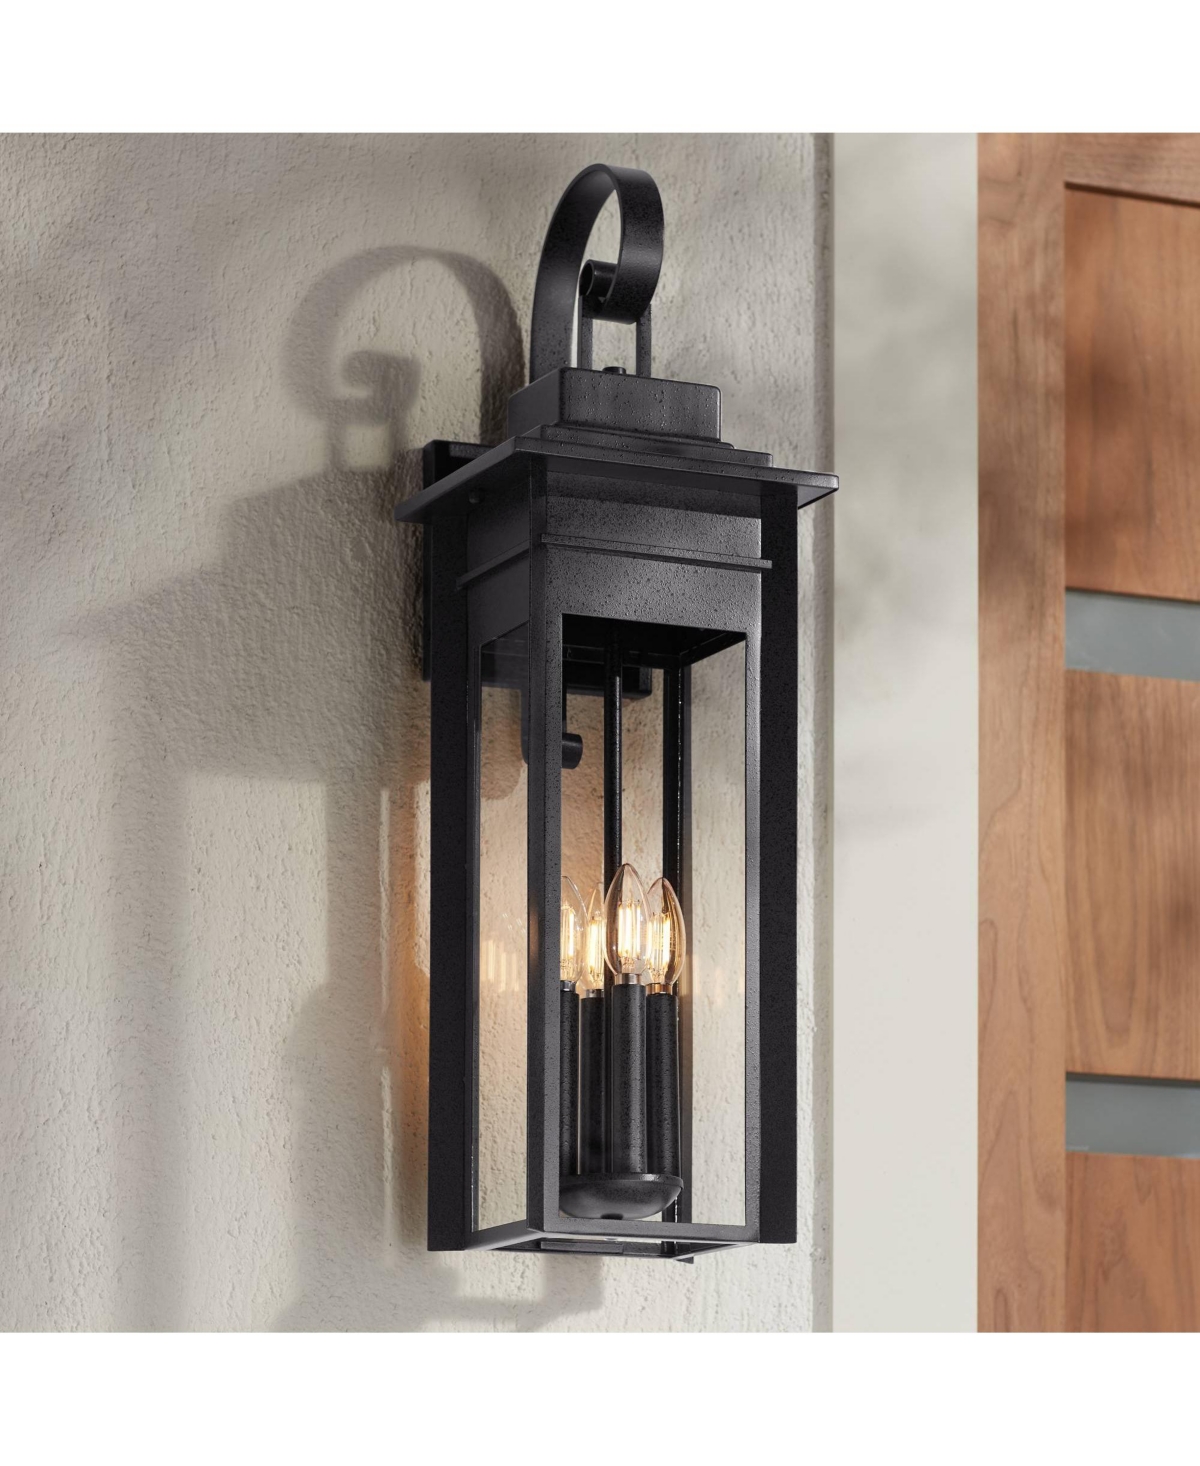 Bransford 28 1/4" High Farmhouse Rustic Outdoor Wall Light Fixture Mount Porch House Exterior Outside Lantern Scroll Weatherproof Black-Specked Gray M